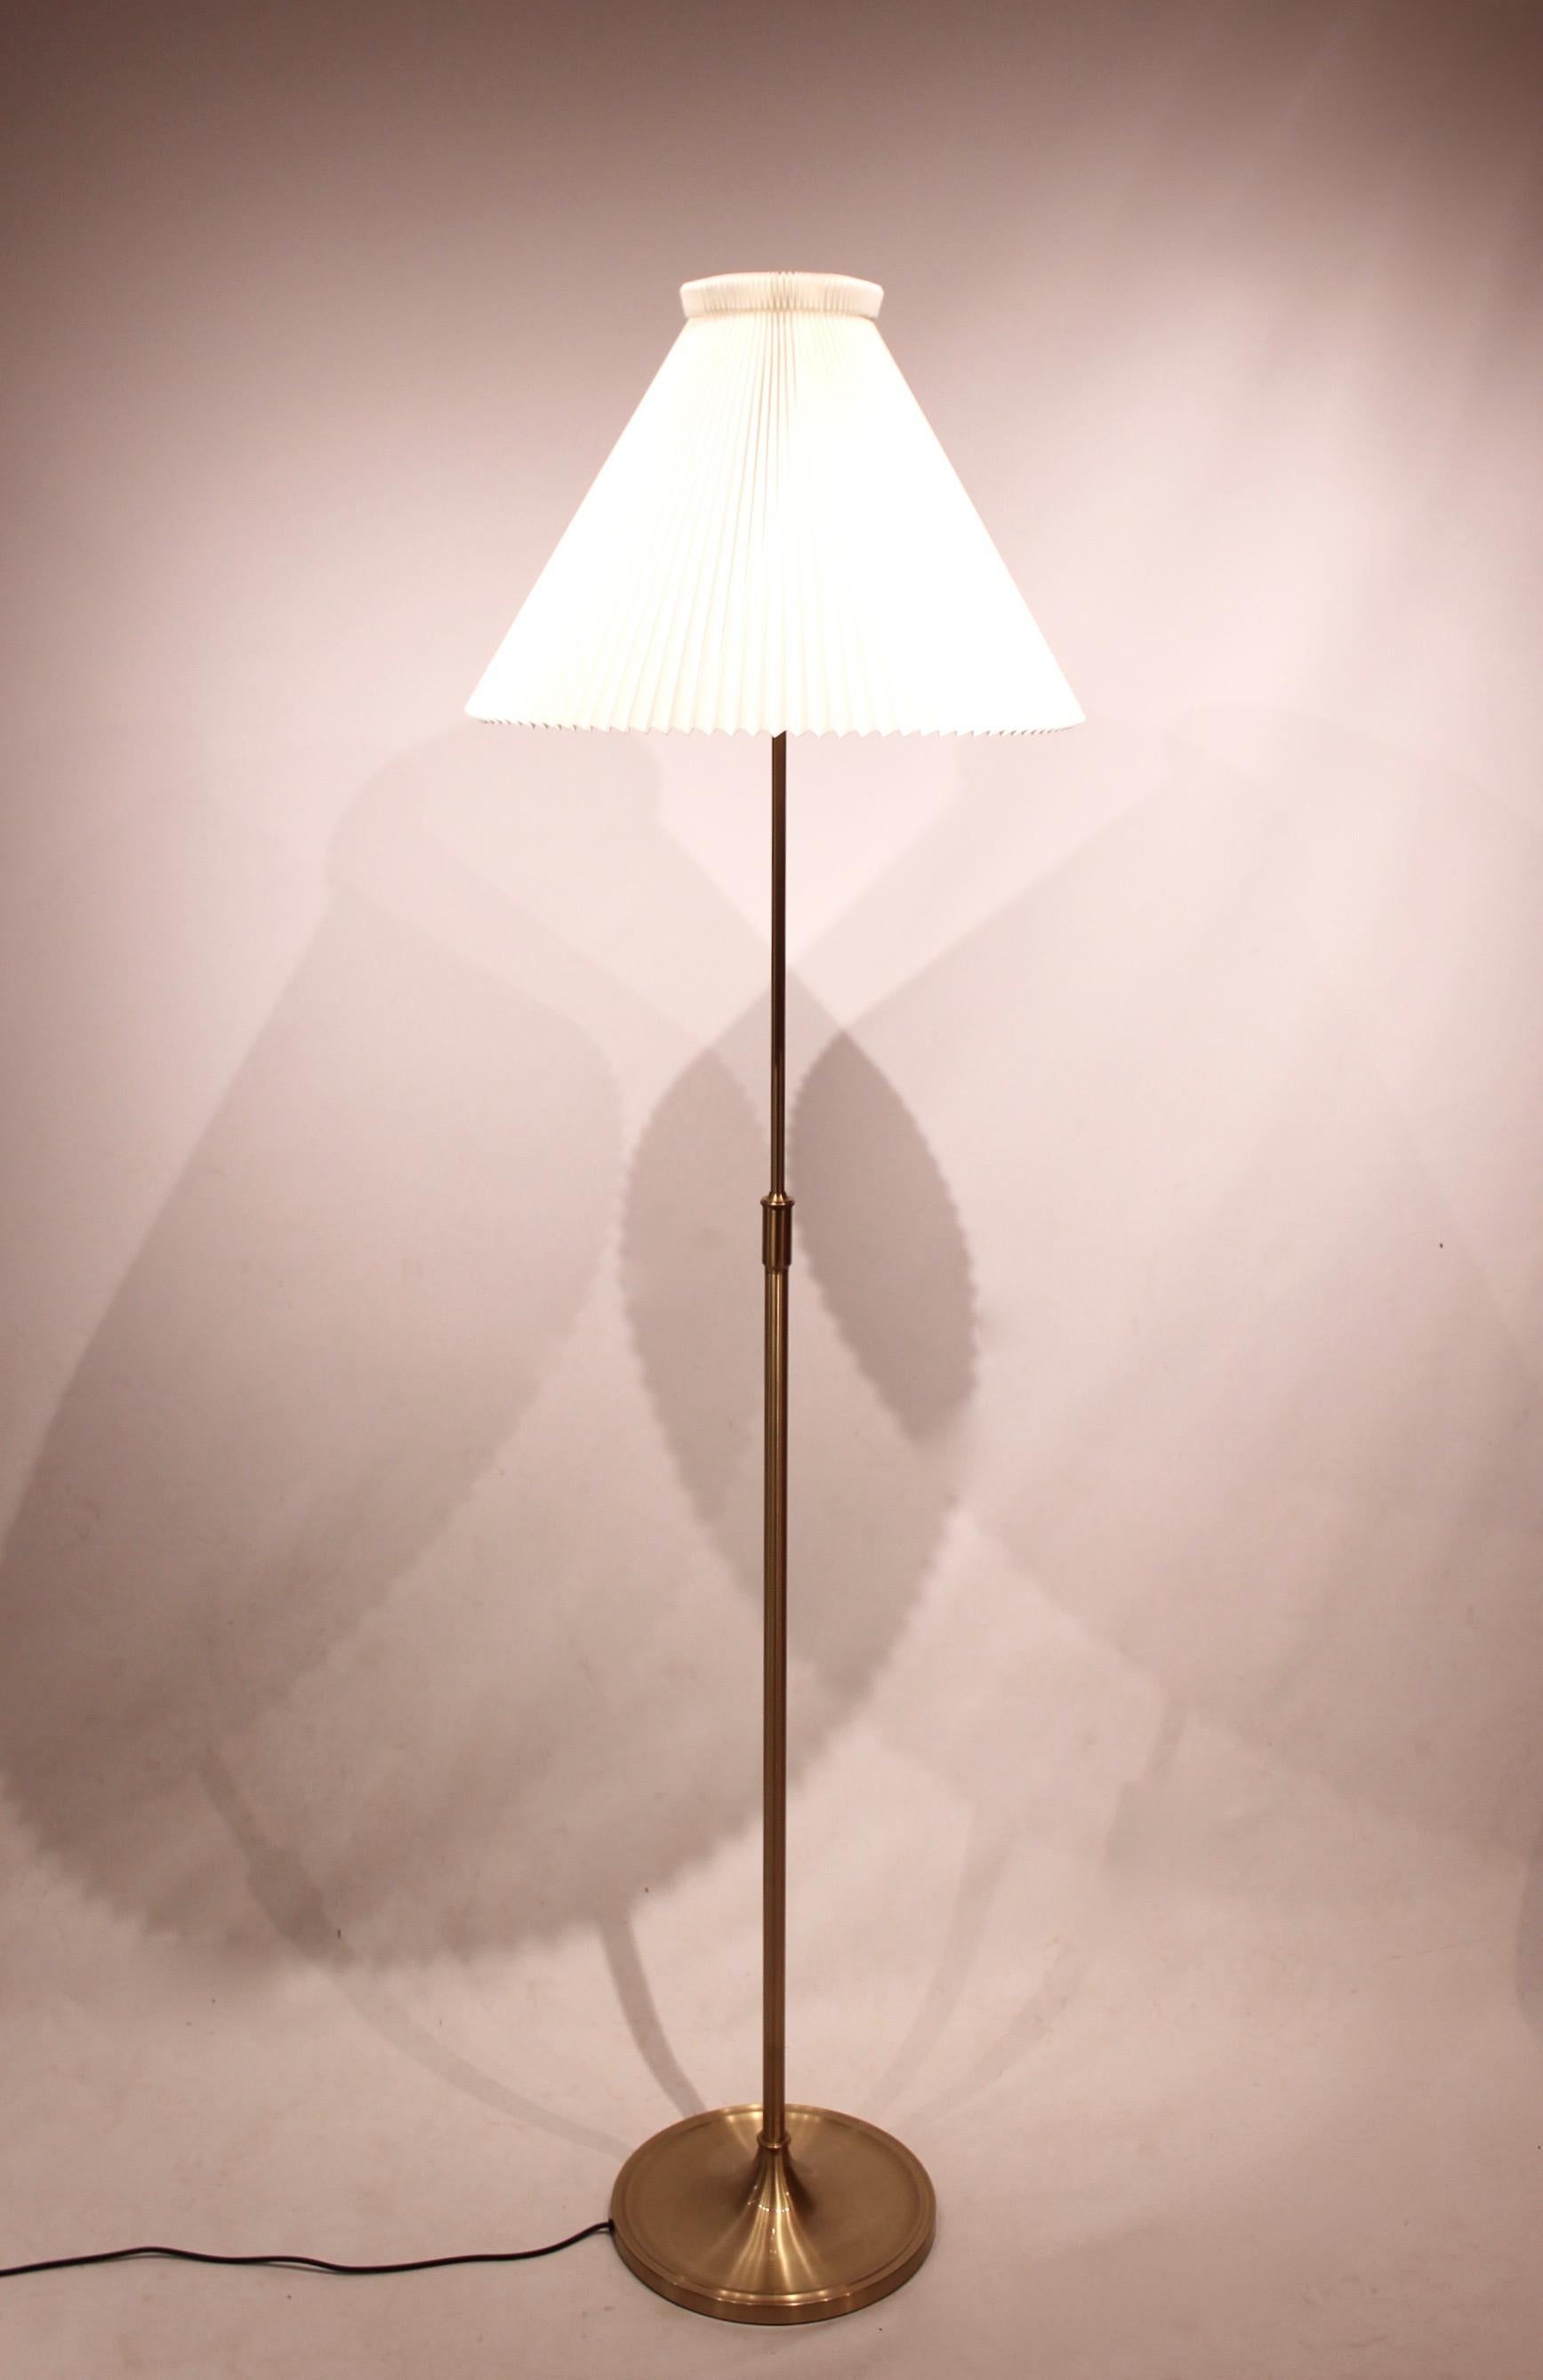 Floor lamp, model 339, designed by Aage Petersen for Le Klint. The lamp is in great vintage condition and can be adjusted in height.